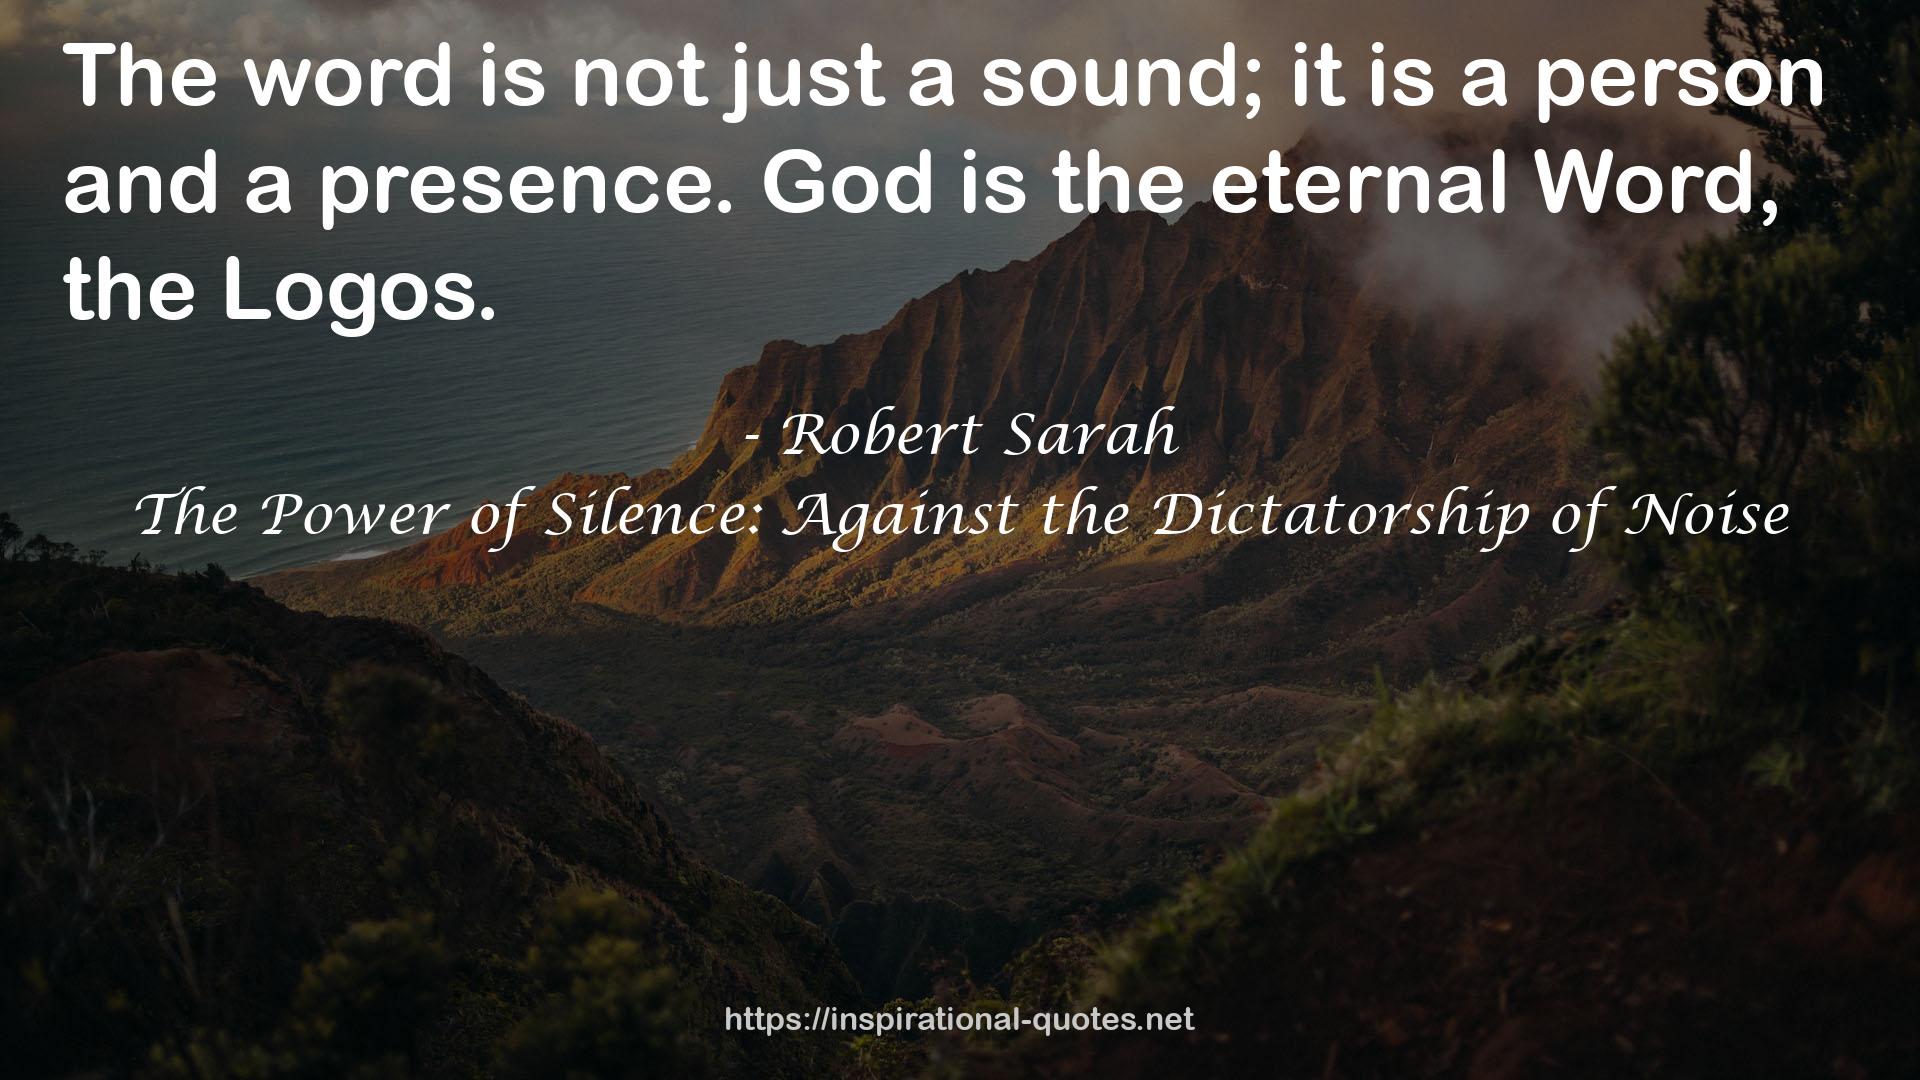 The Power of Silence: Against the Dictatorship of Noise QUOTES